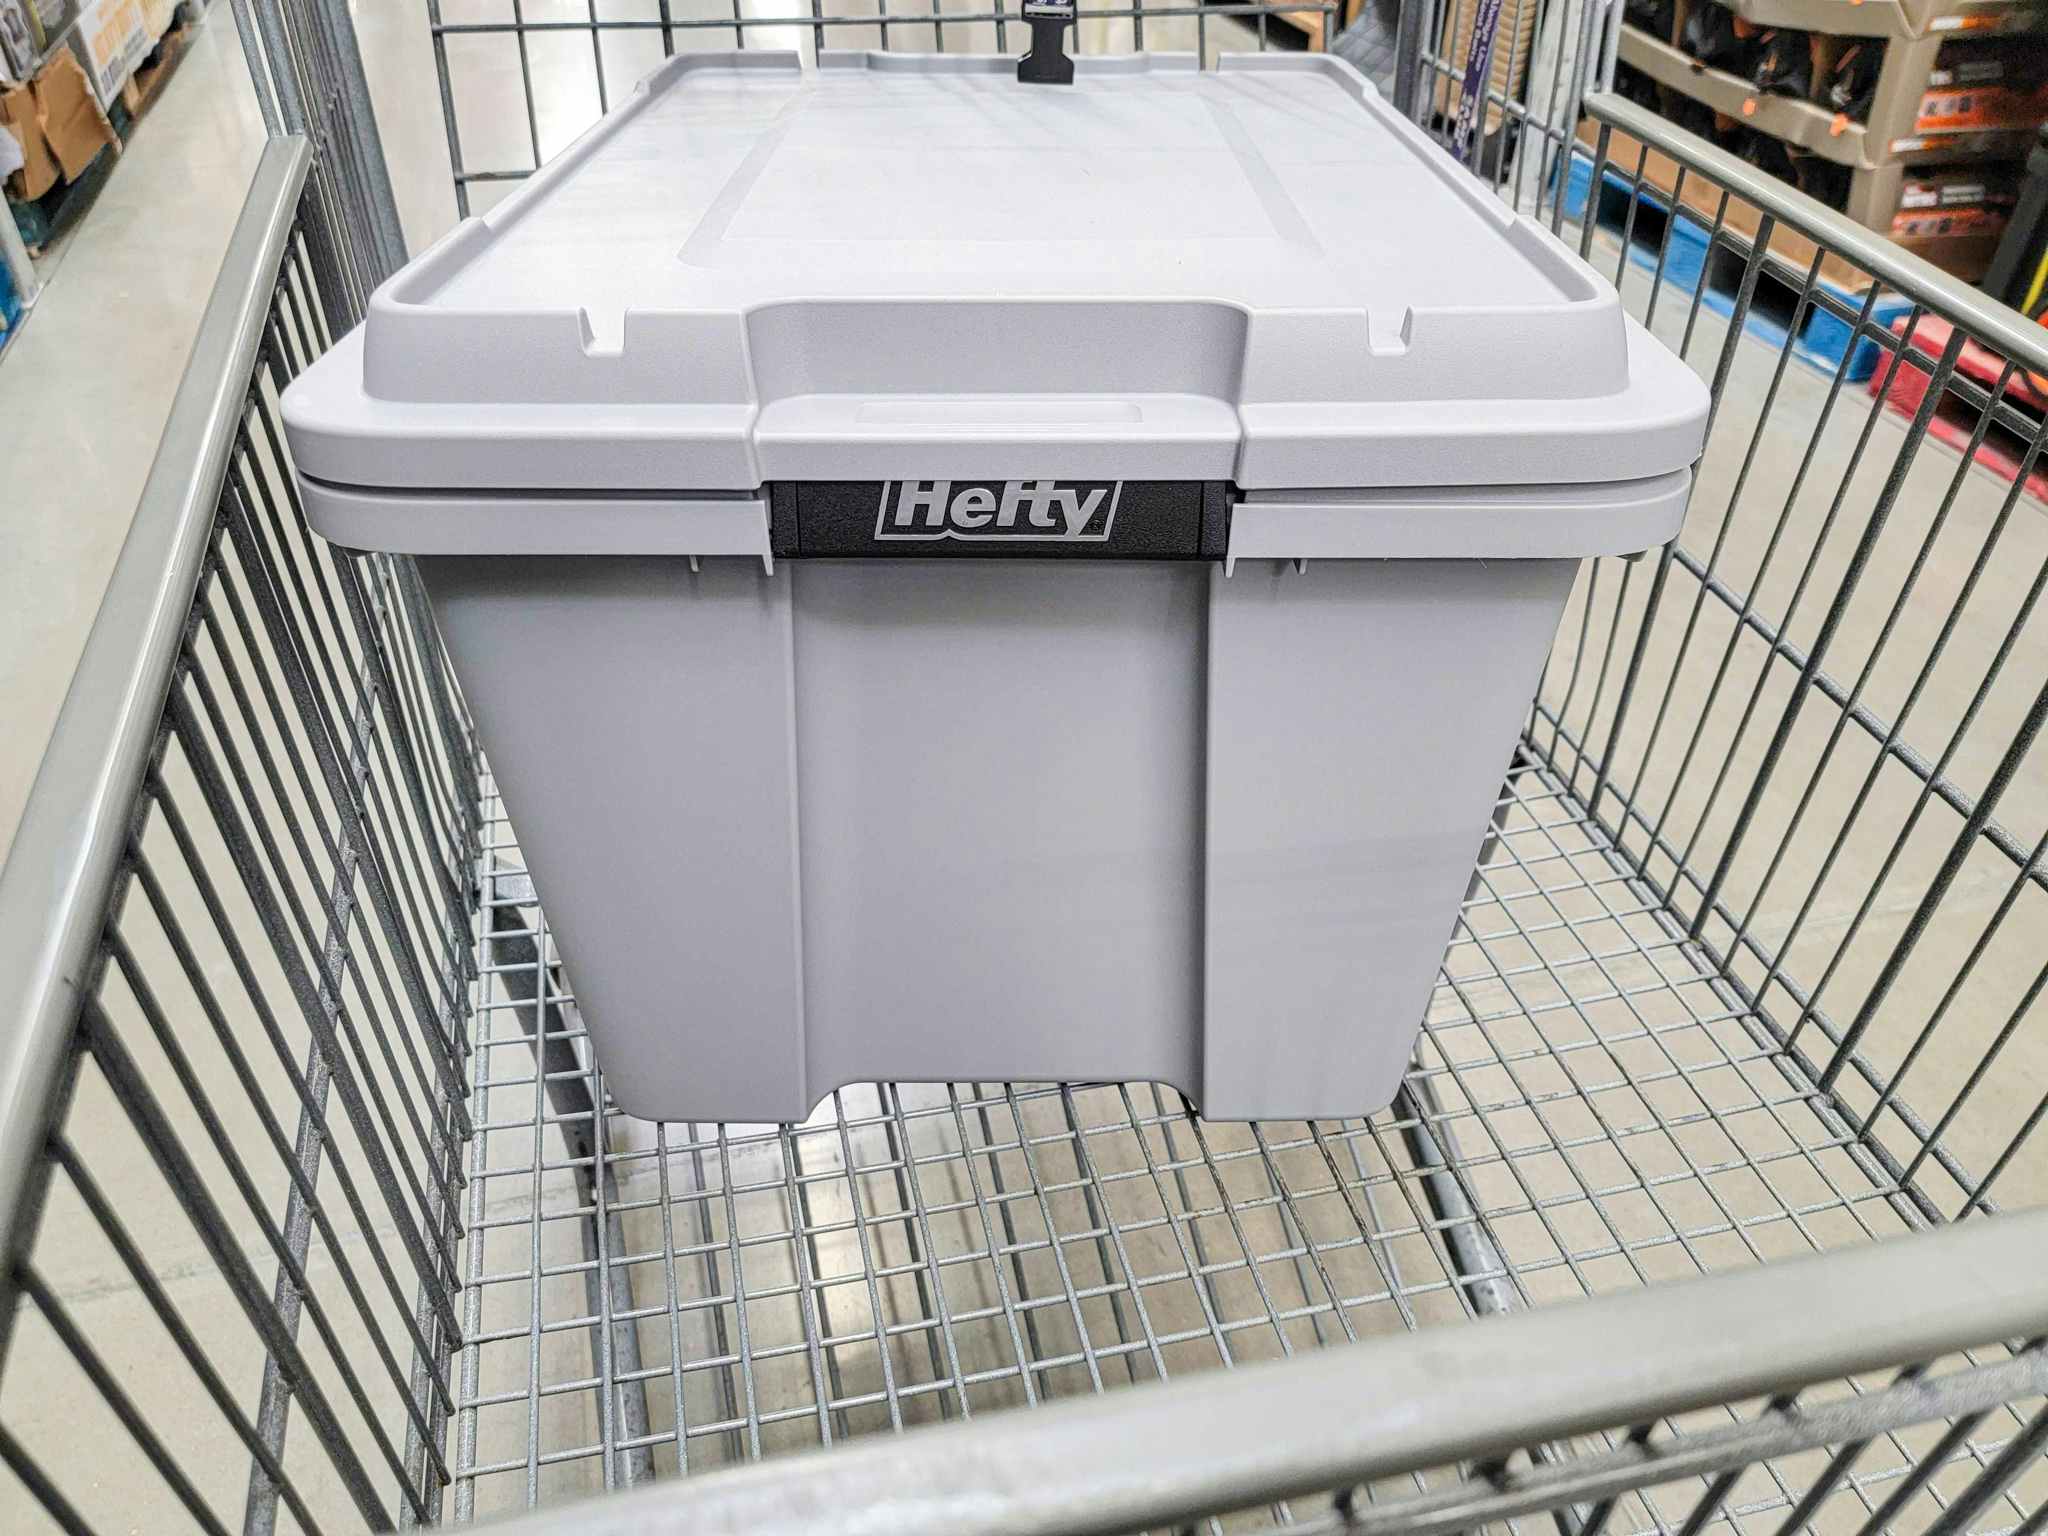 a grey 18 gallon hefty storage tote in a cart